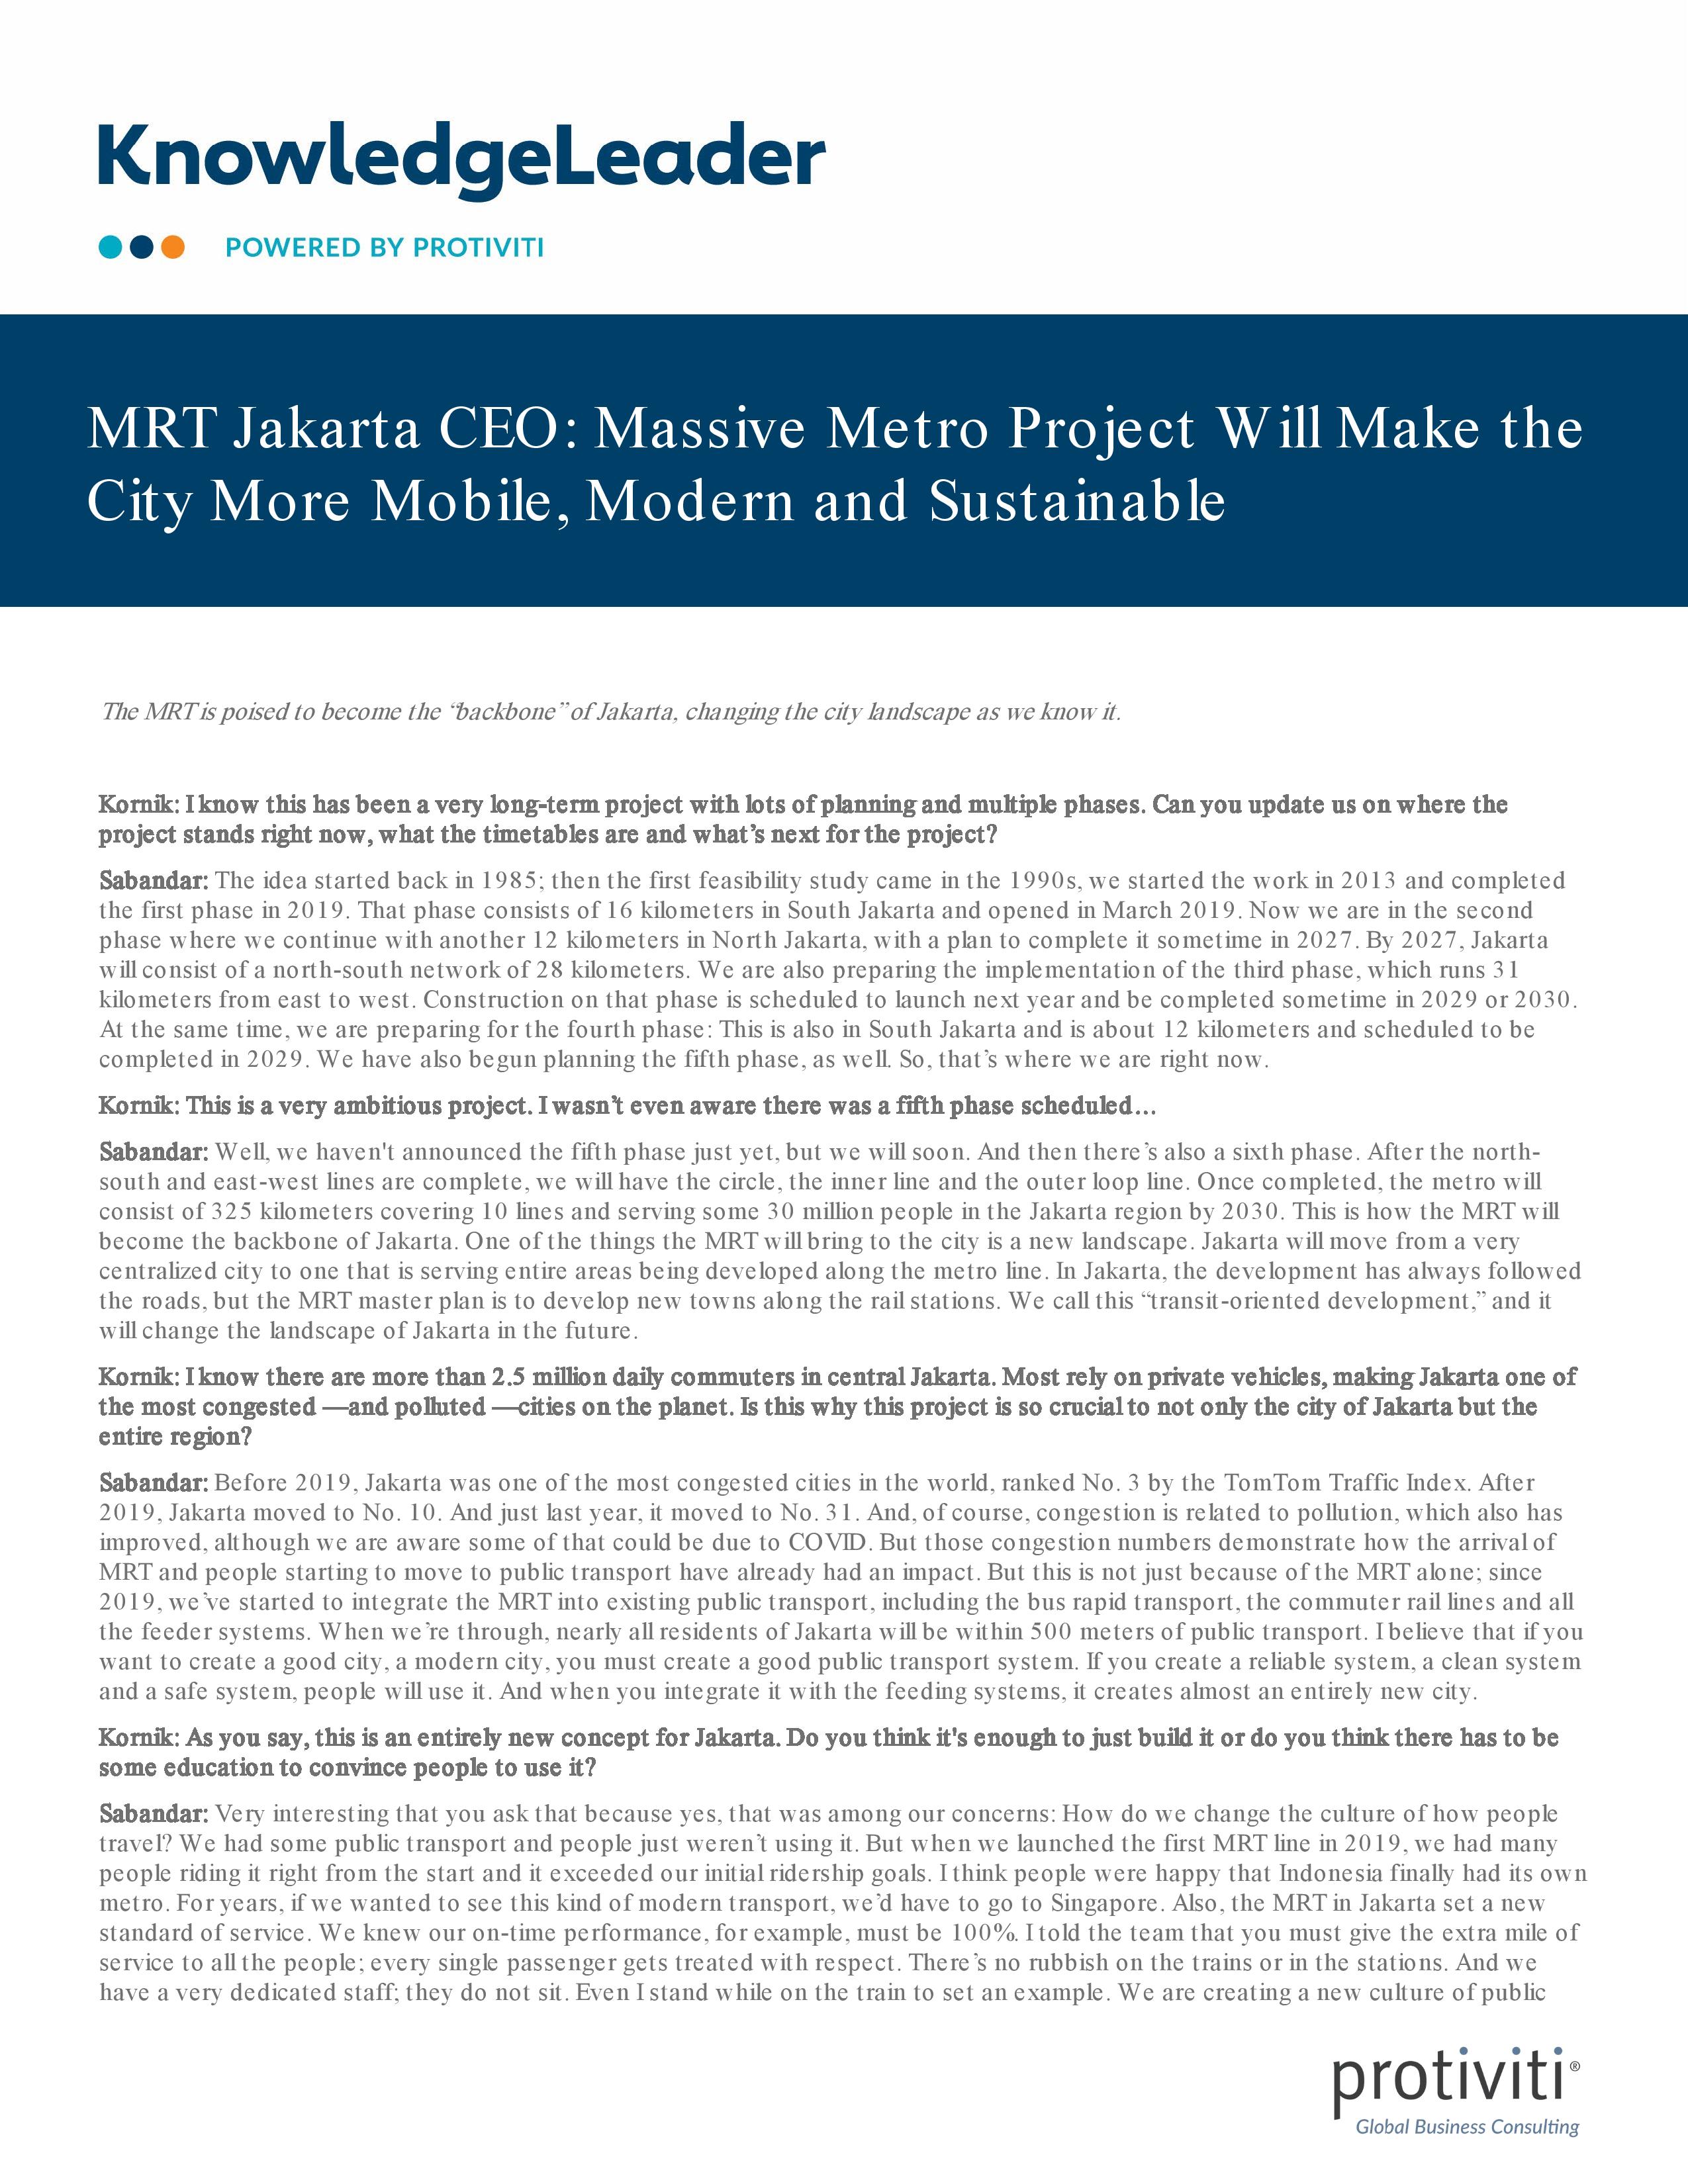 screenshot of the first page of MRT Jakarta CEO Massive Metro Project Will Make the City More Mobile, Modern and Sustainable